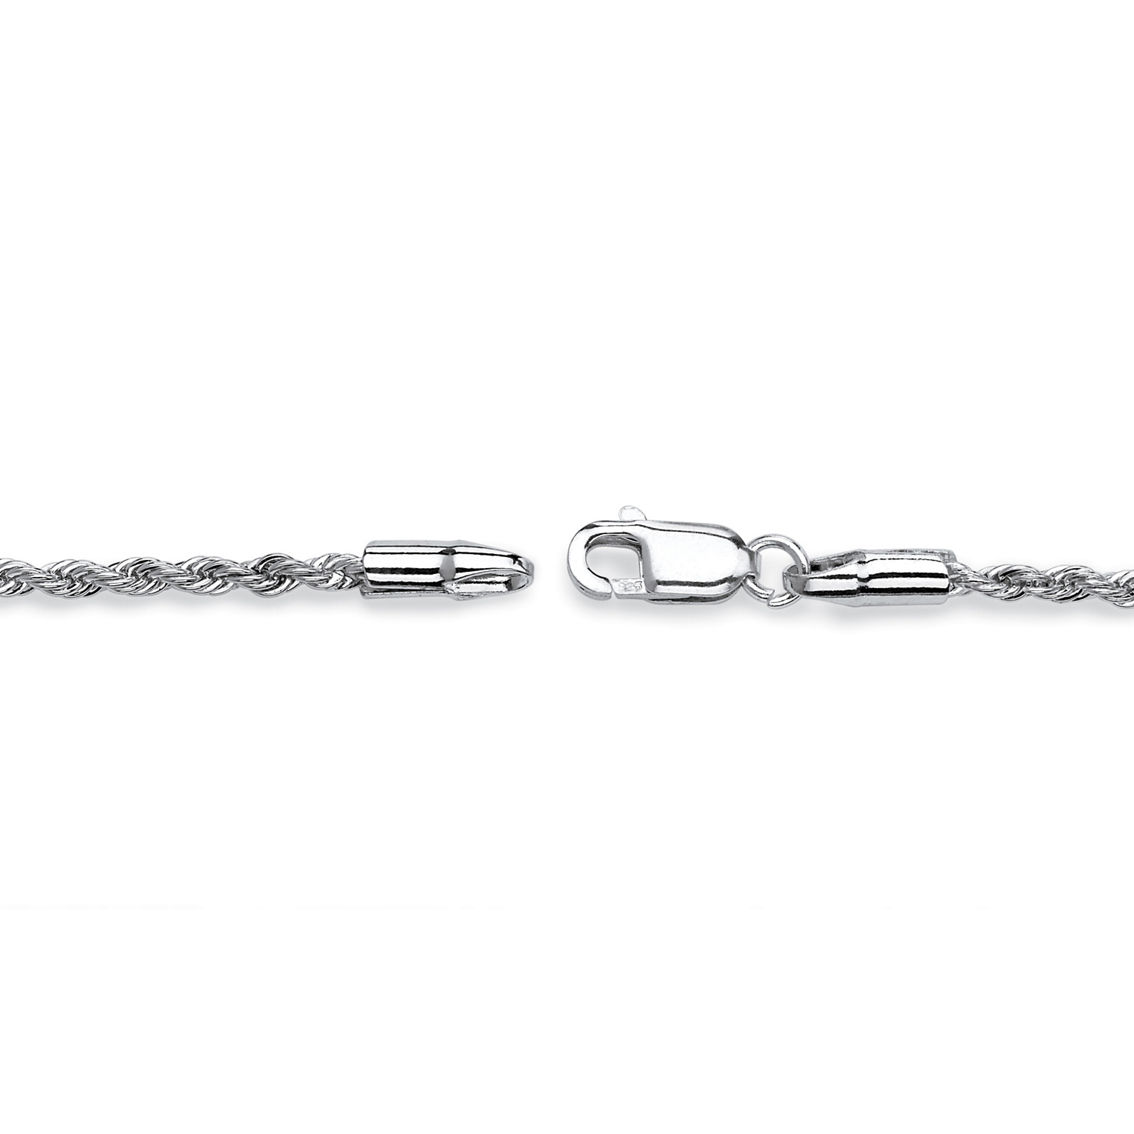 PalmBeach Rope Chain Necklace in Sterling Silver 18